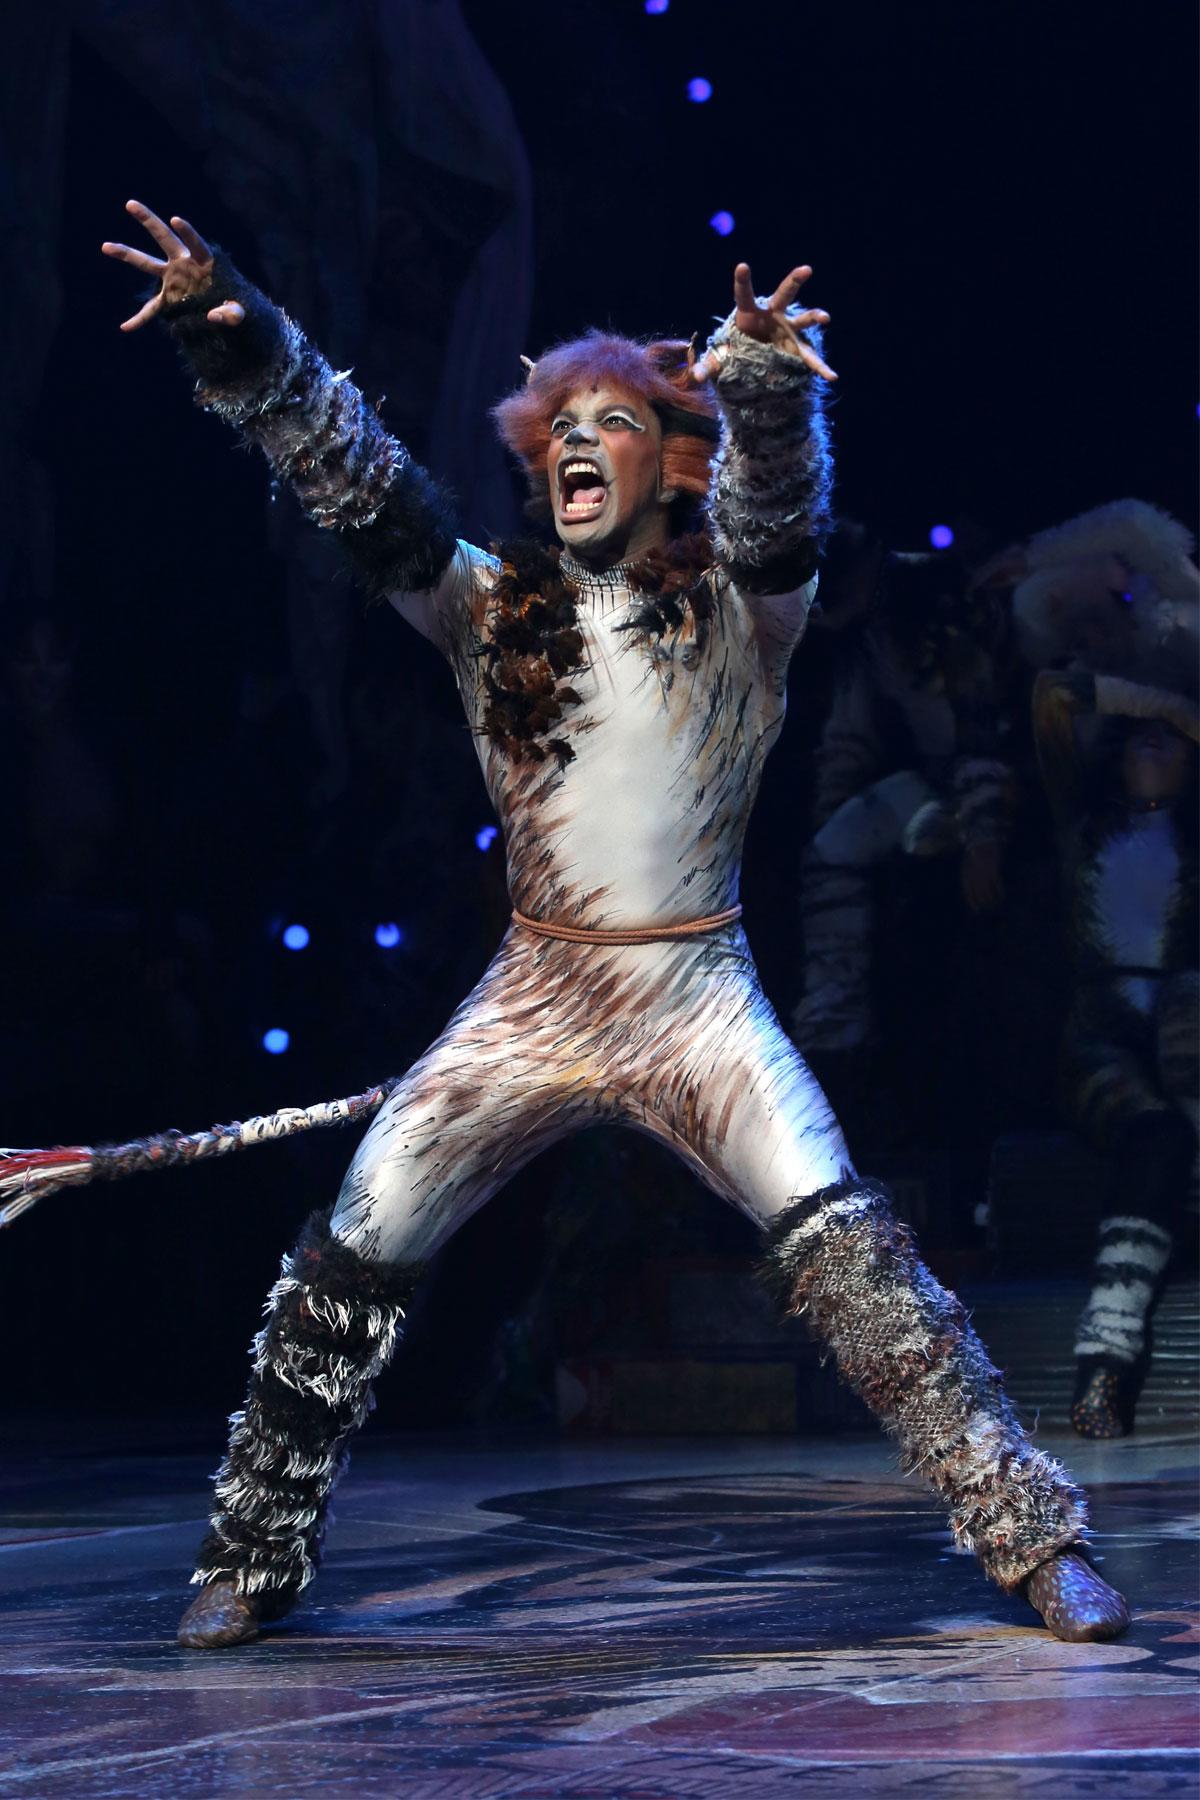 CATS: The Musical' Louisville Broadway review: Great songs, costumes